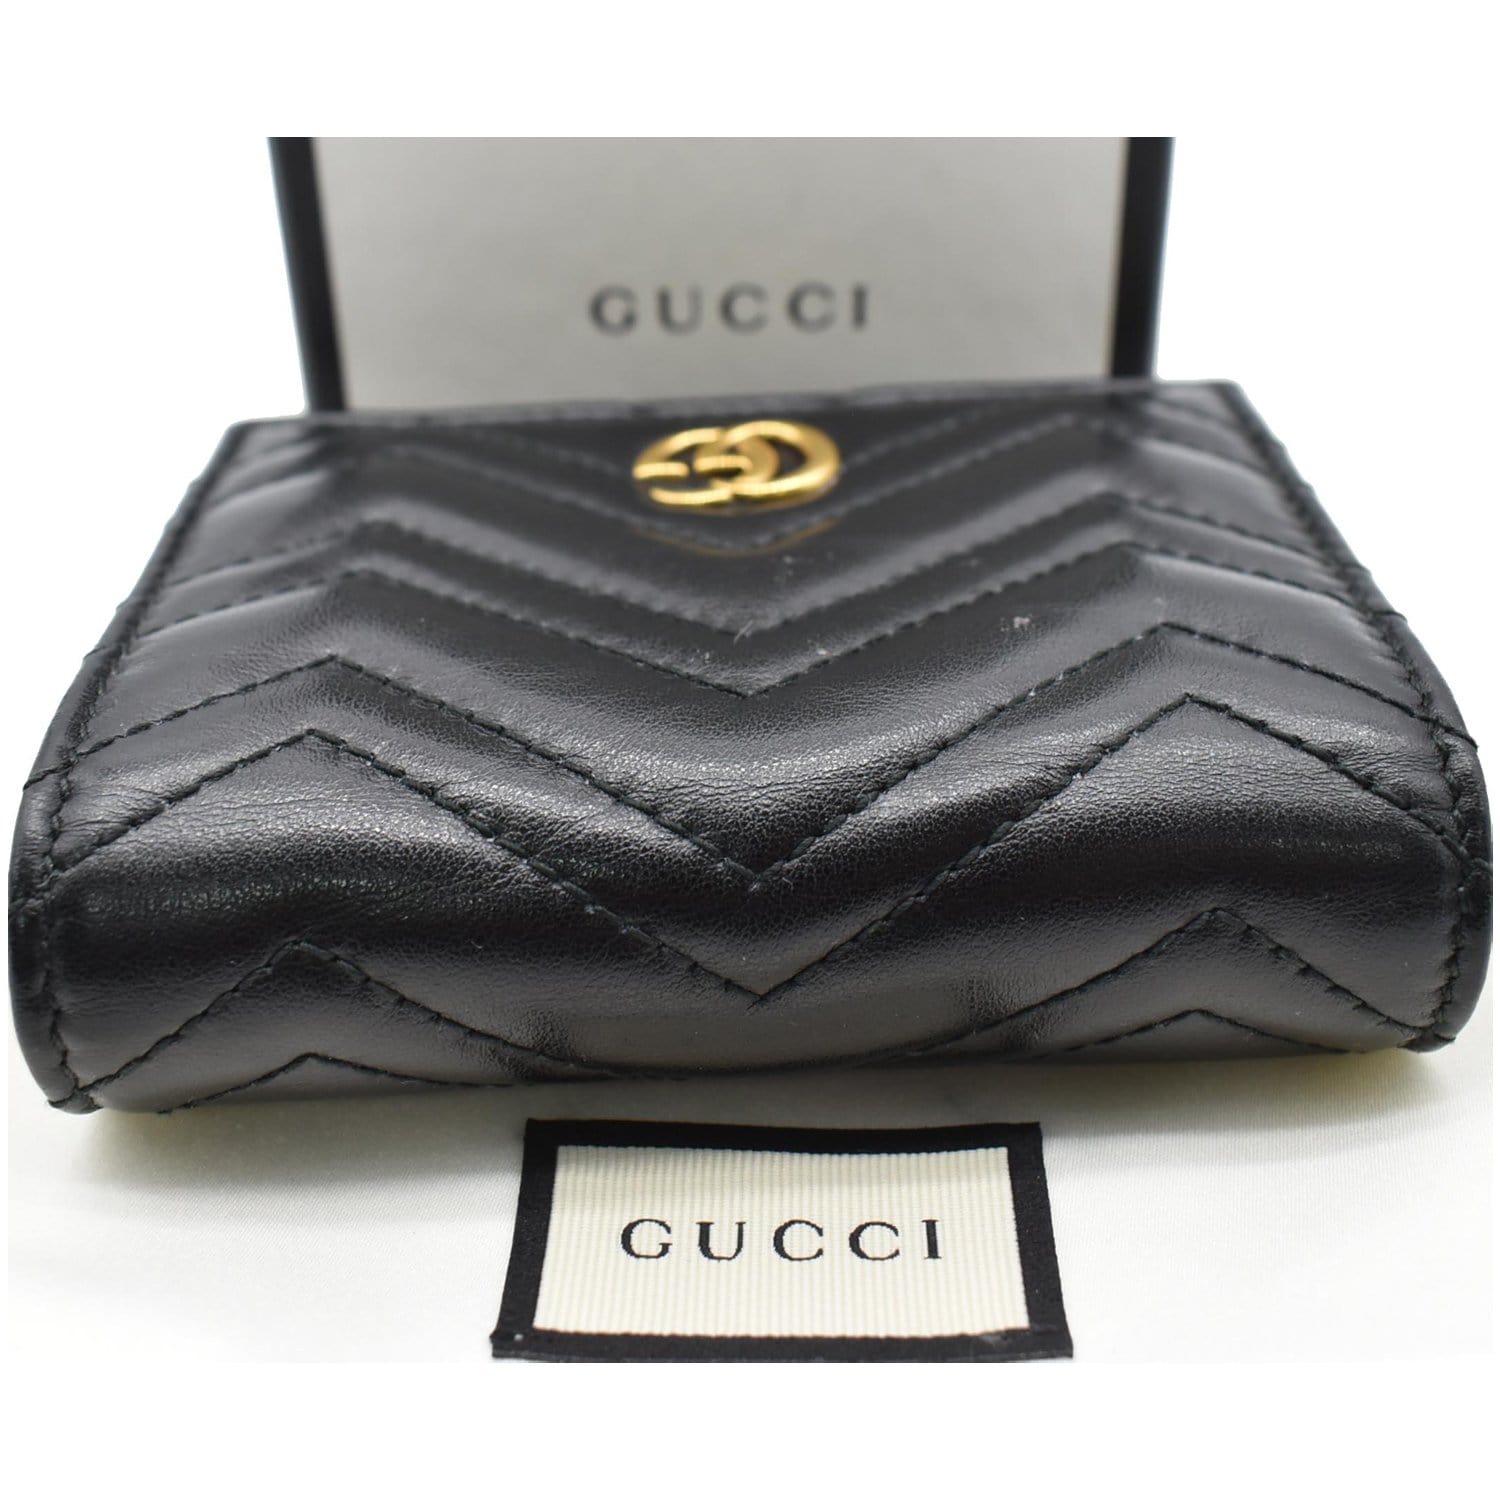 Gucci Marmont GG Matelasse Leather Case Wallet 466492 - 10%